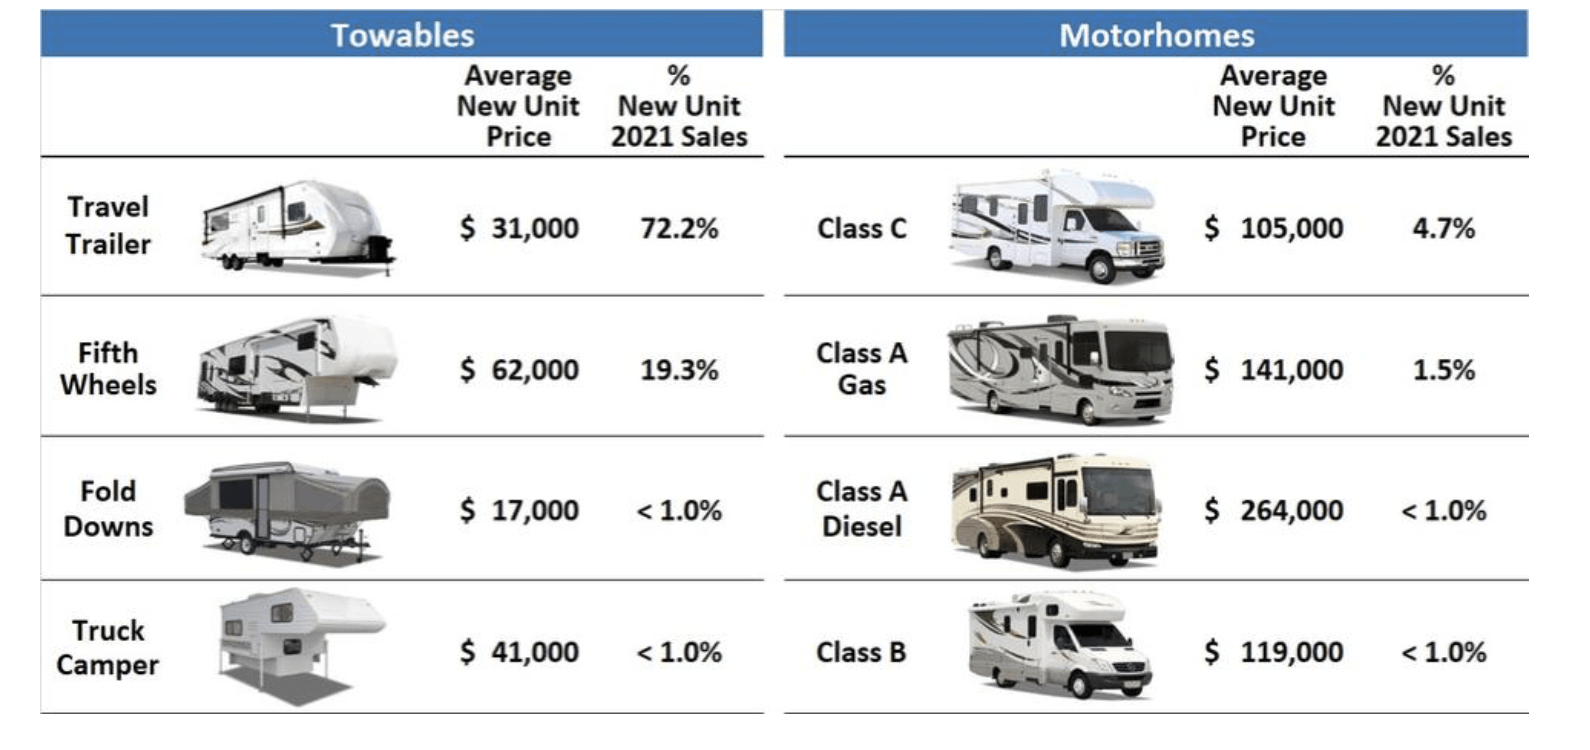 Camping World Lower RV Sales And Margins Likely Ahead For 2023